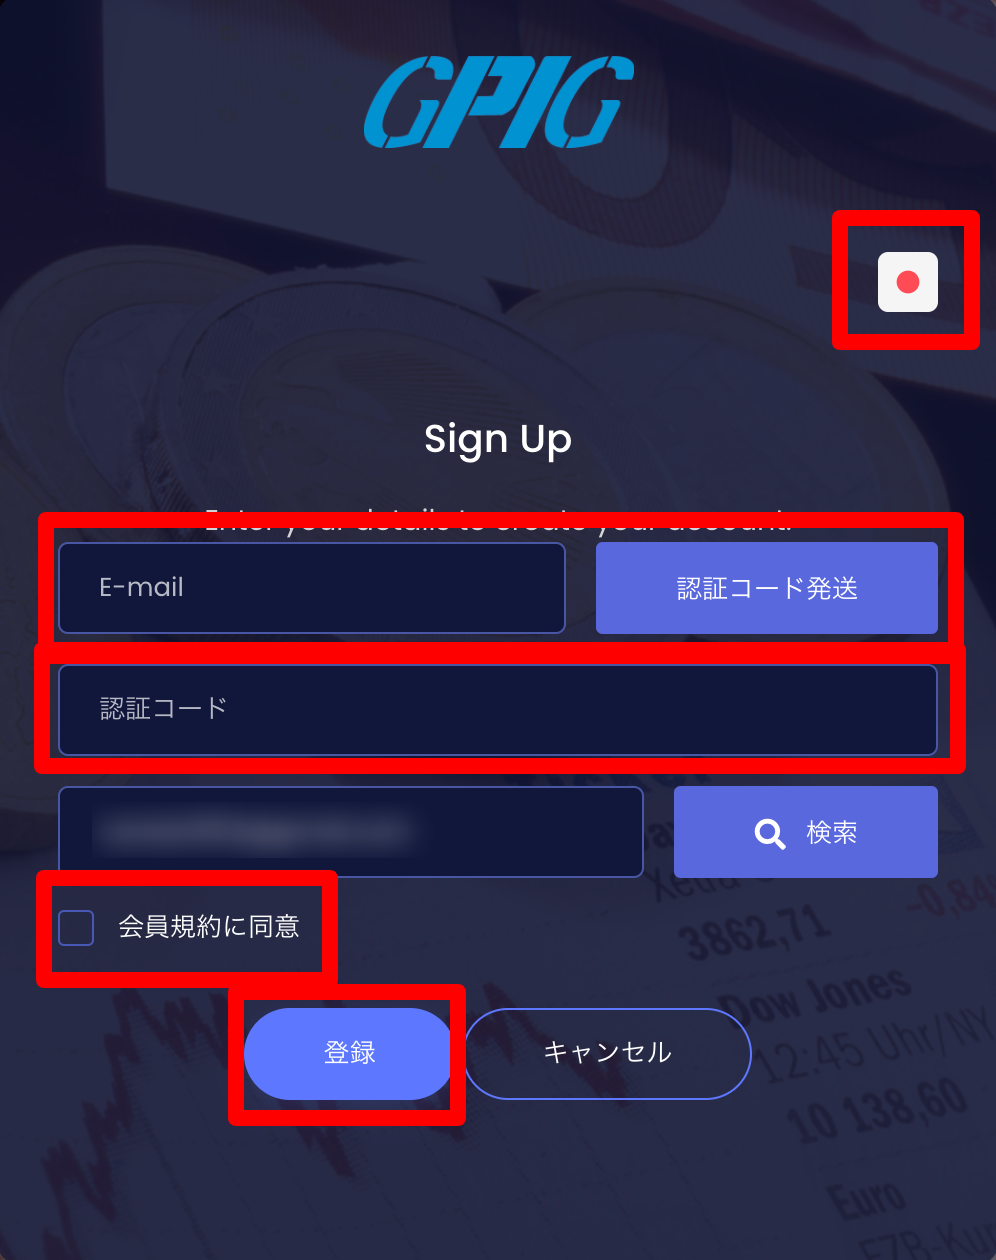 How to register GPIG